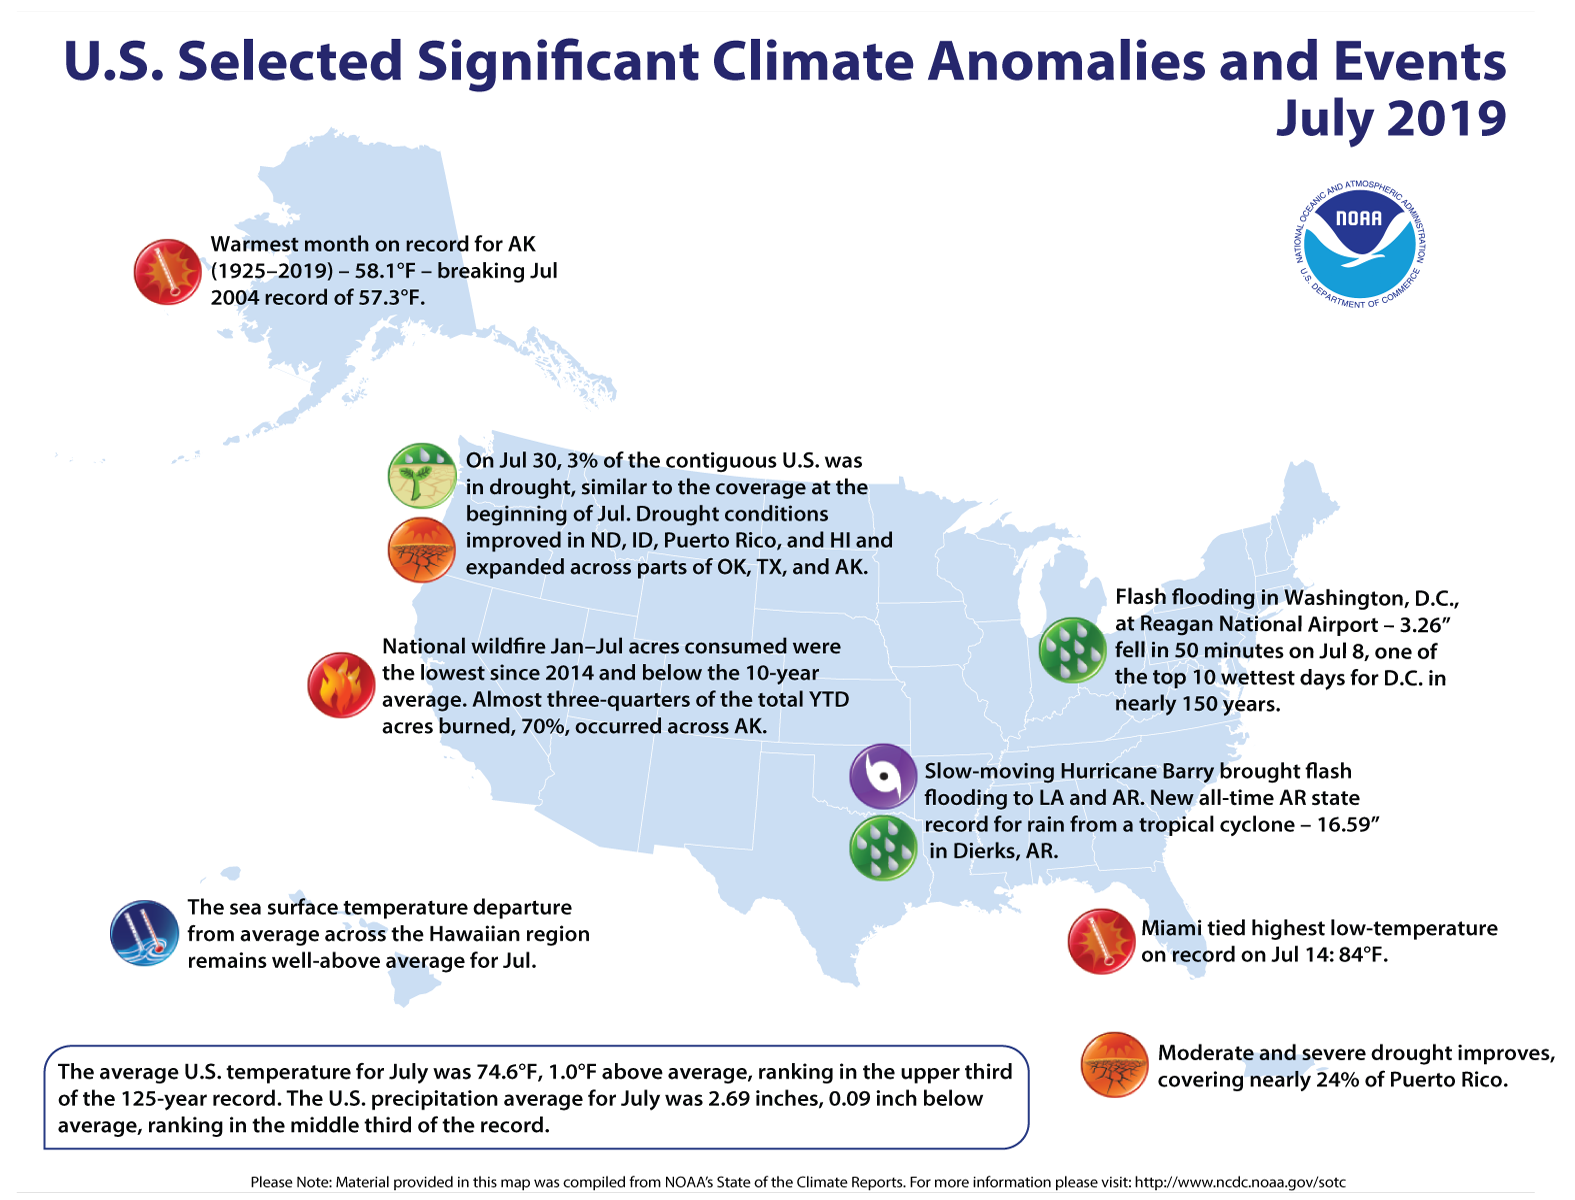 An annotated map of the United States showing notable climate events that occurred across the country during July 2019. For more, see the bulleted list below and the report summary online at http://bit.ly/USClimate201907.